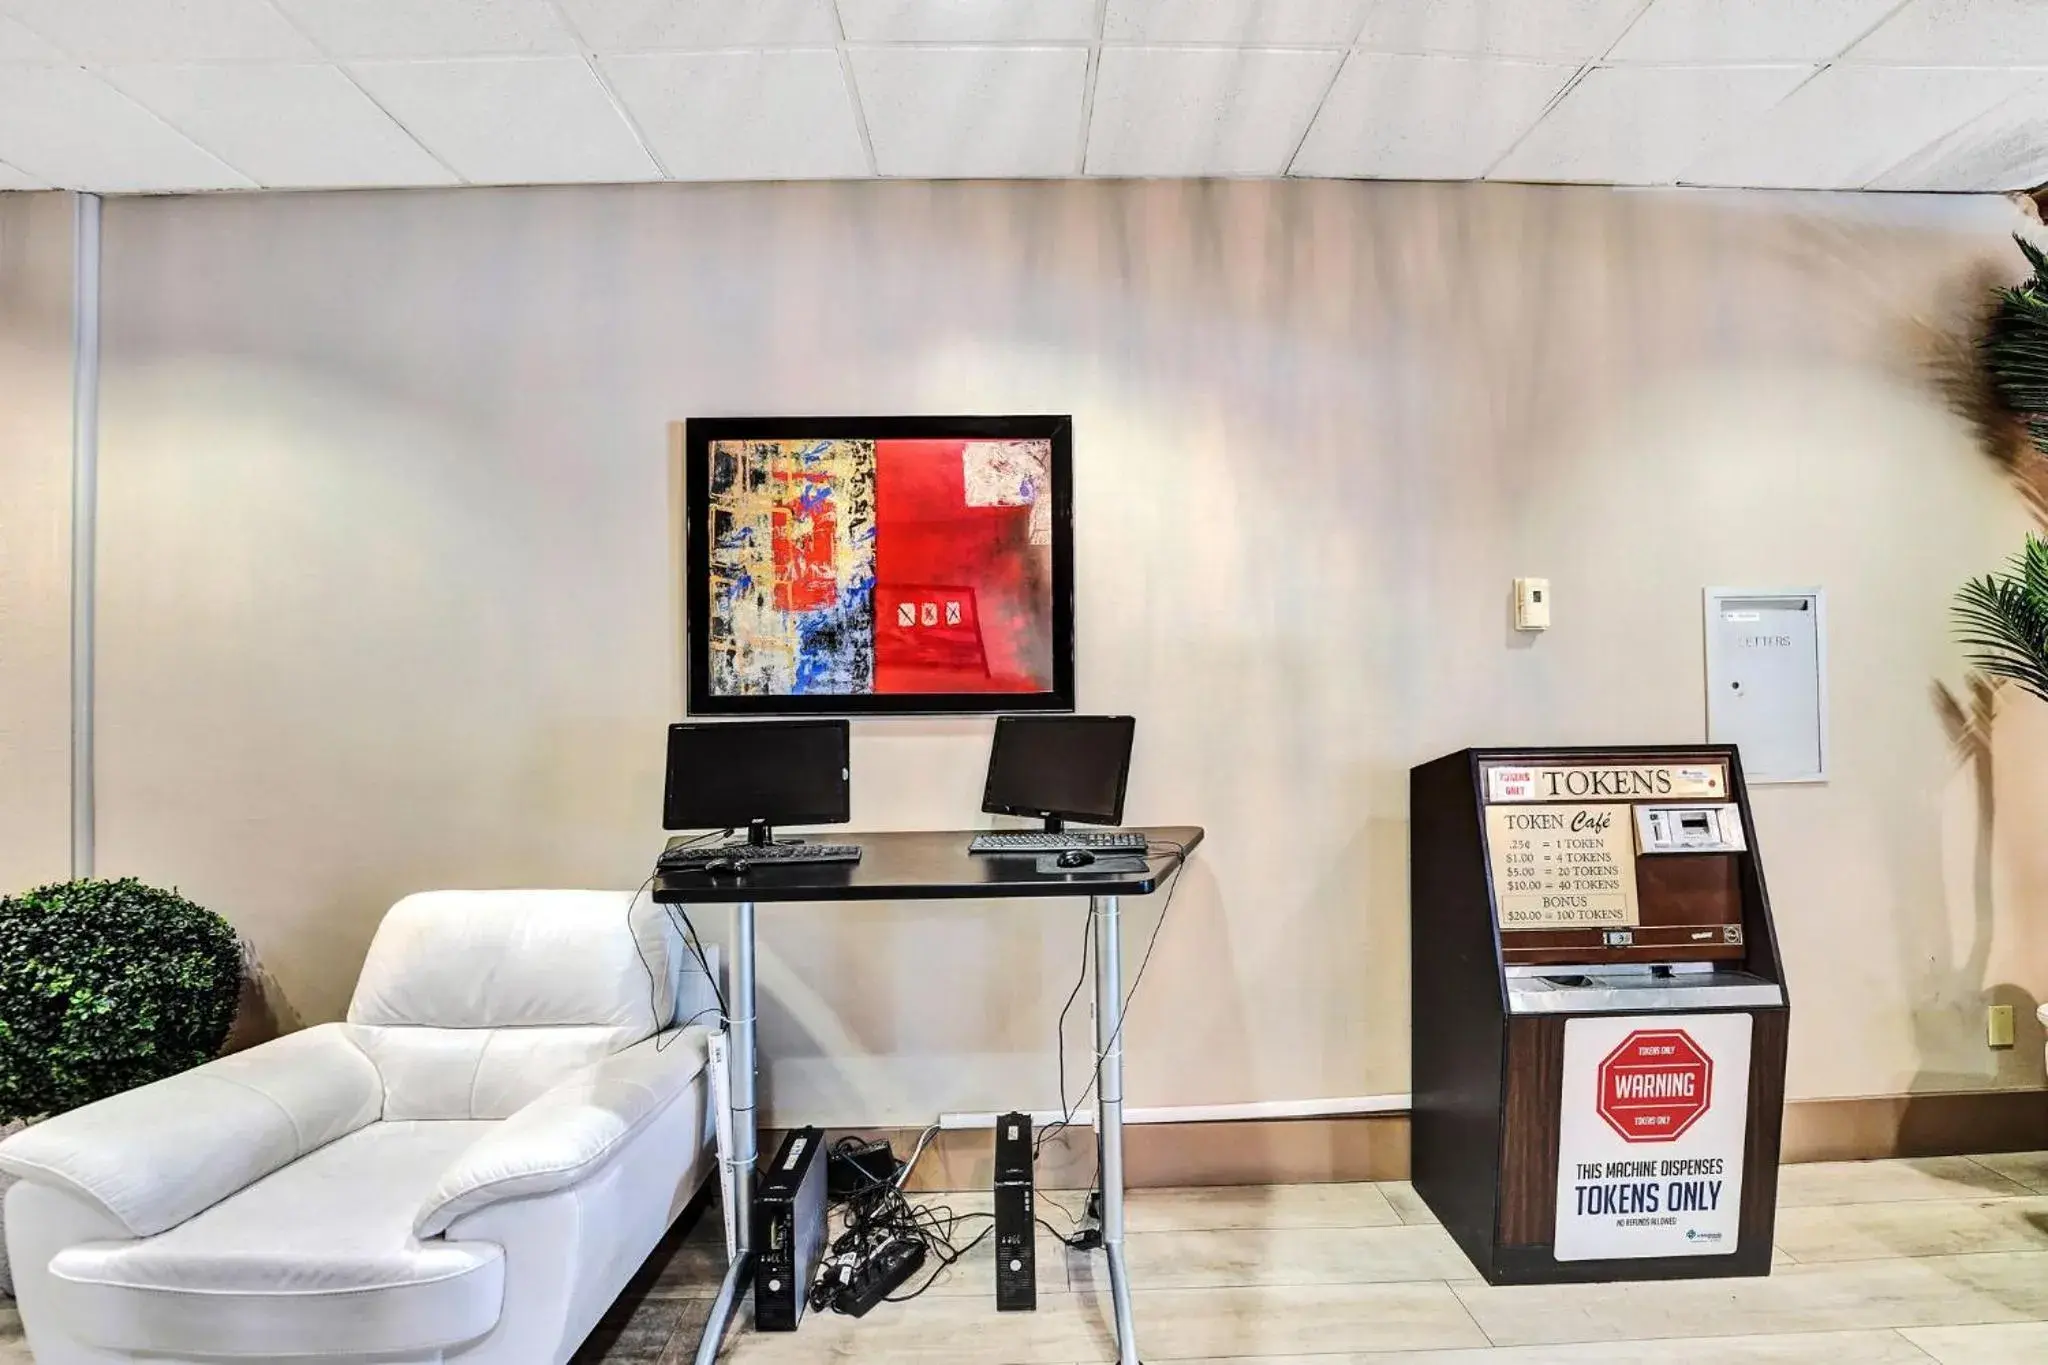 Business facilities in Plaza Hotel Fort Lauderdale